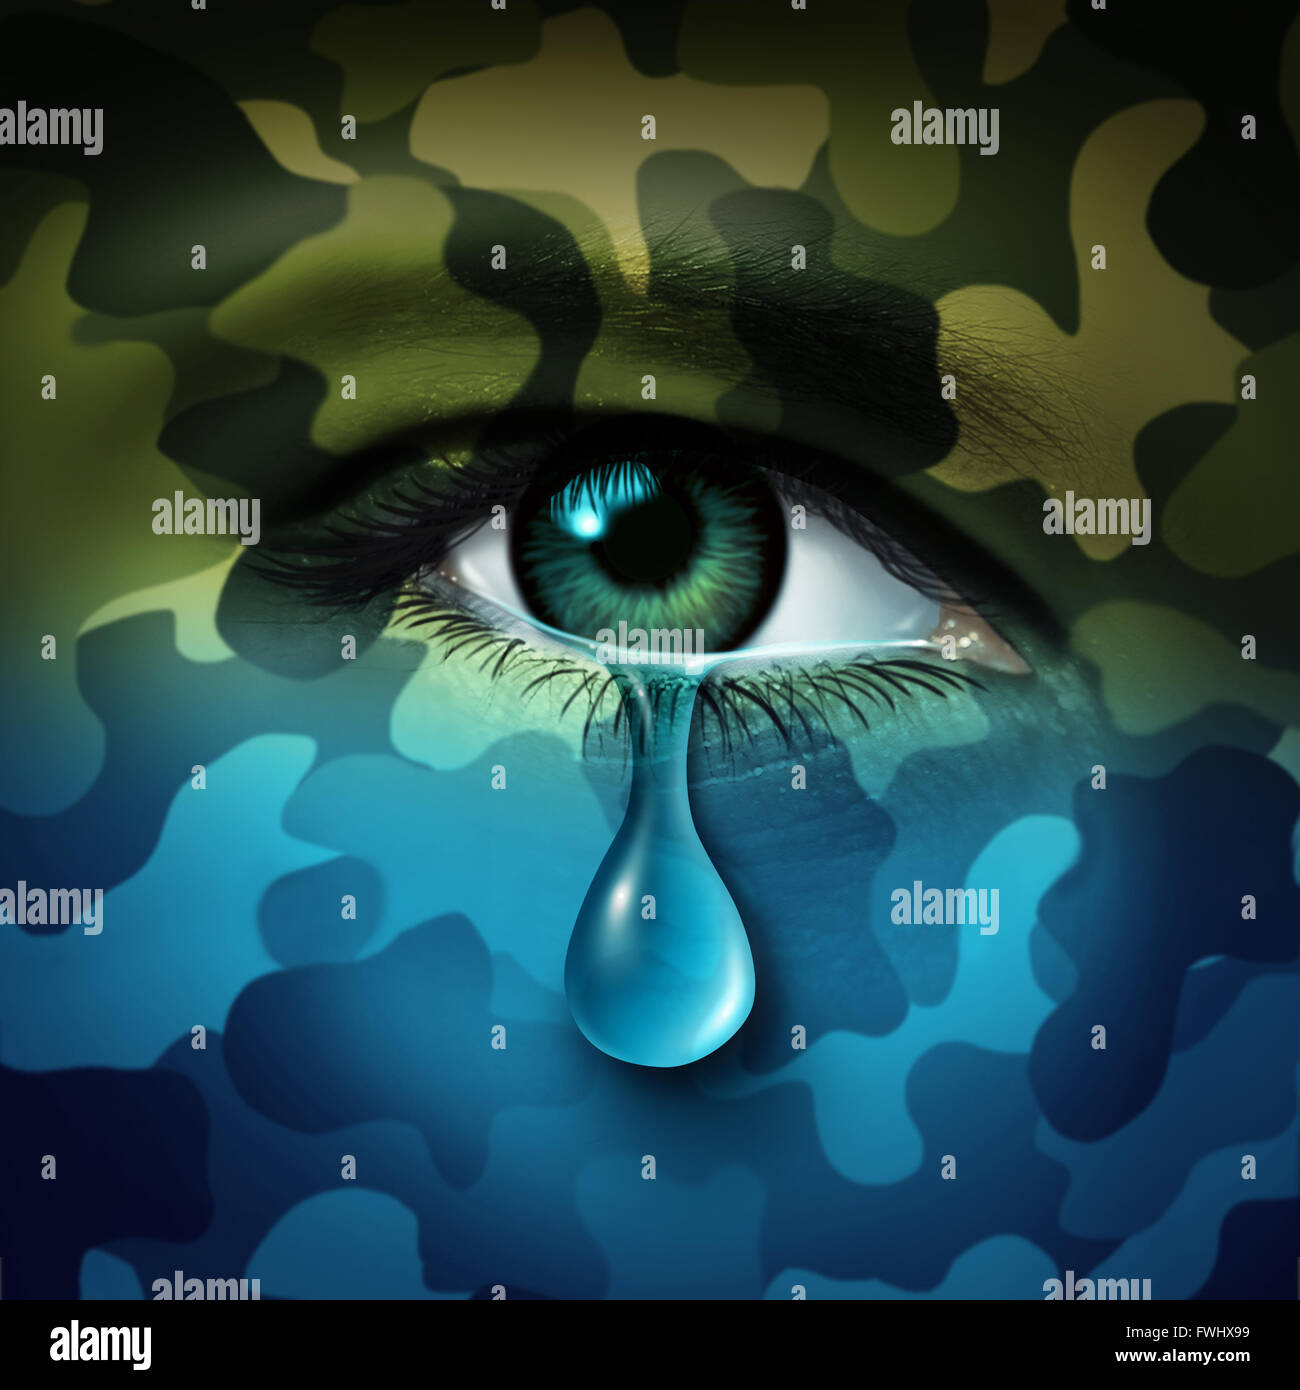 Military depression mental health concept and casualty of war symbol as a crying human eye tear with green camouflage transforming into a blue mood as a metaphor for veteran healthcare or combatant issues. Stock Photo